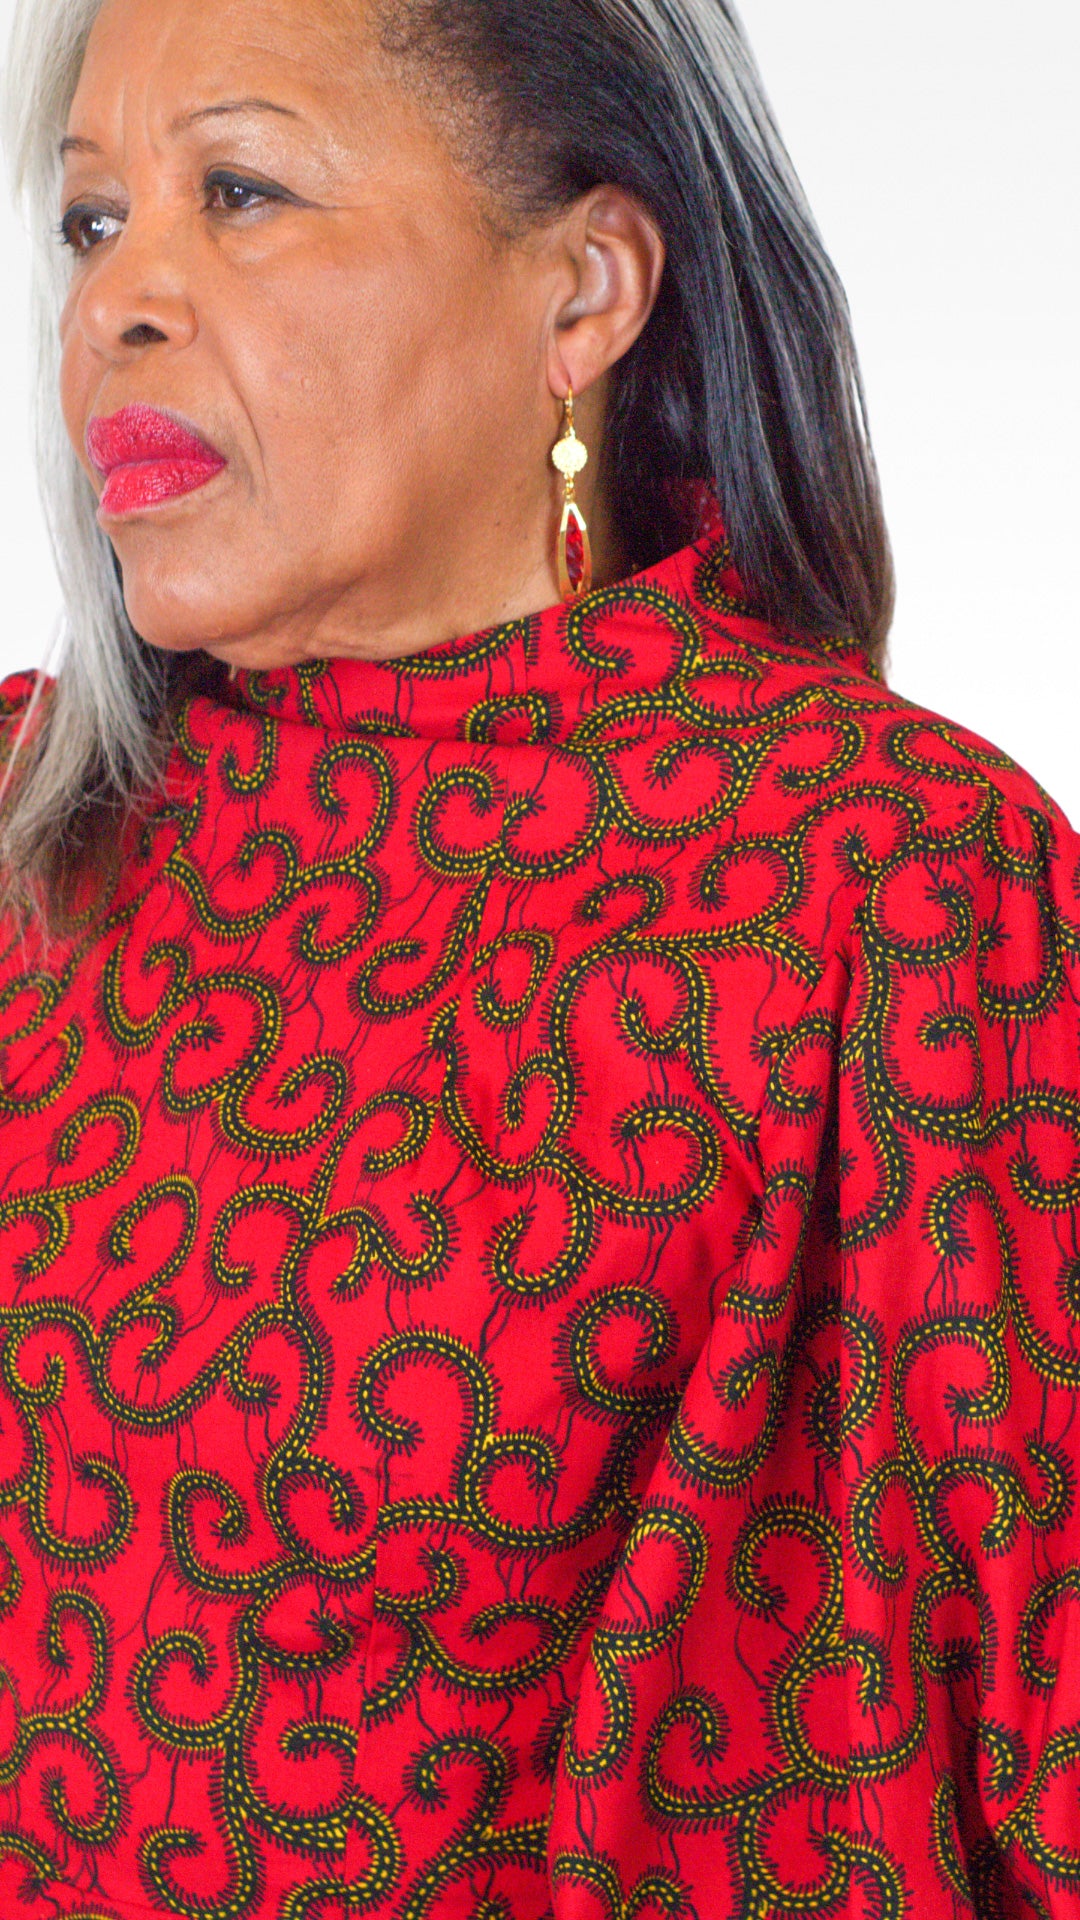 A close-up view highlighting the the red dress and its swirly elements.